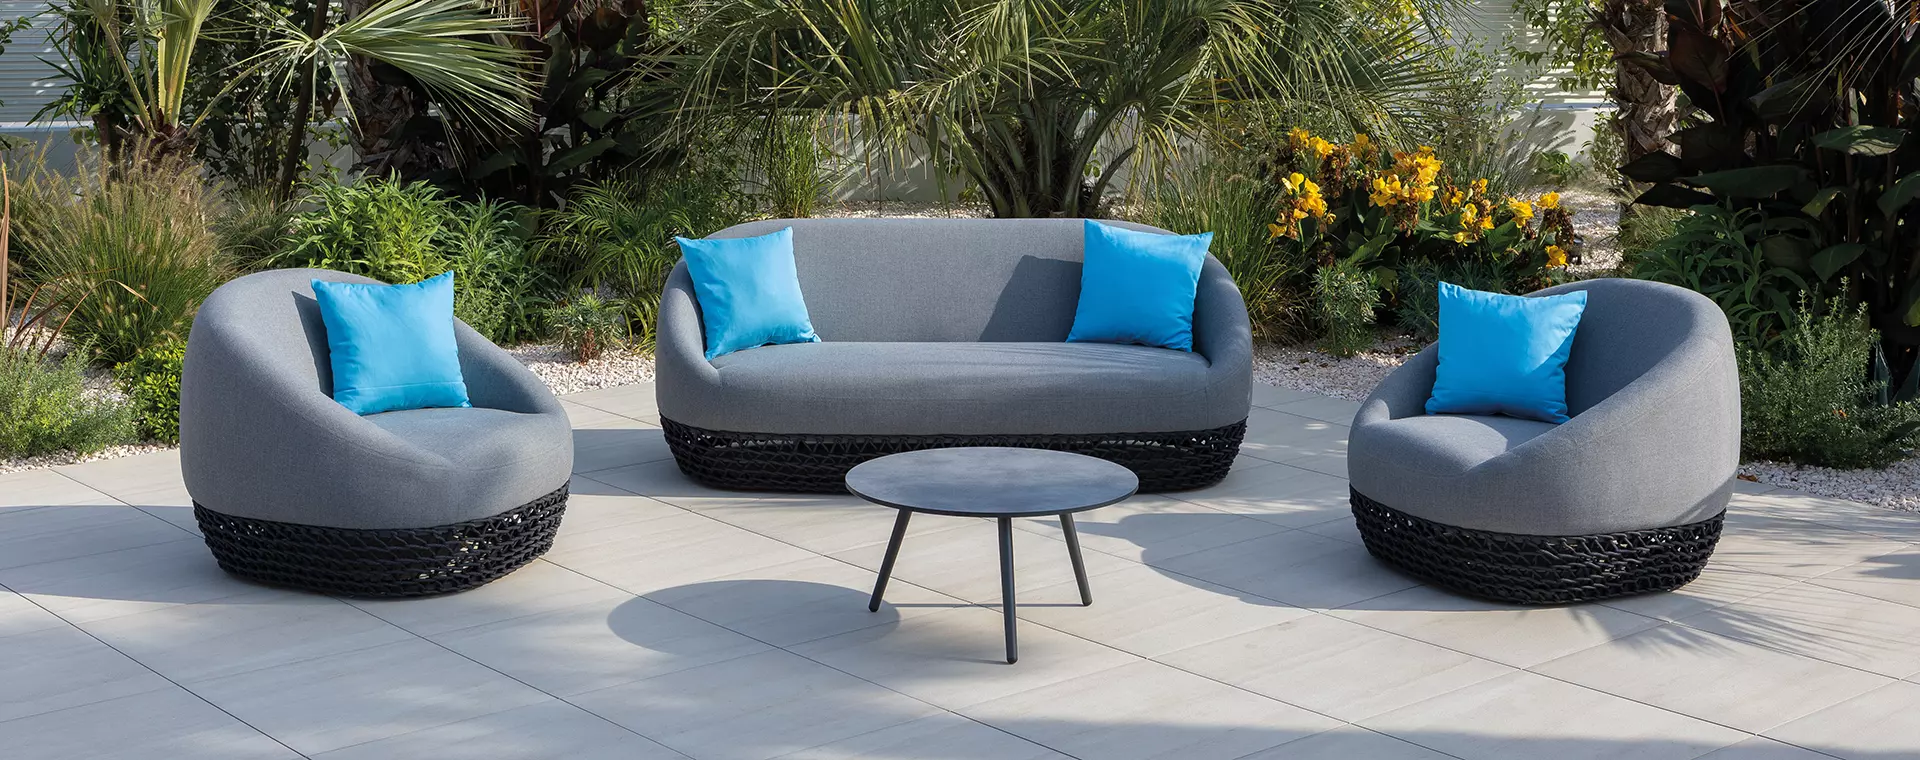 Tonga collection : outdoor furniture